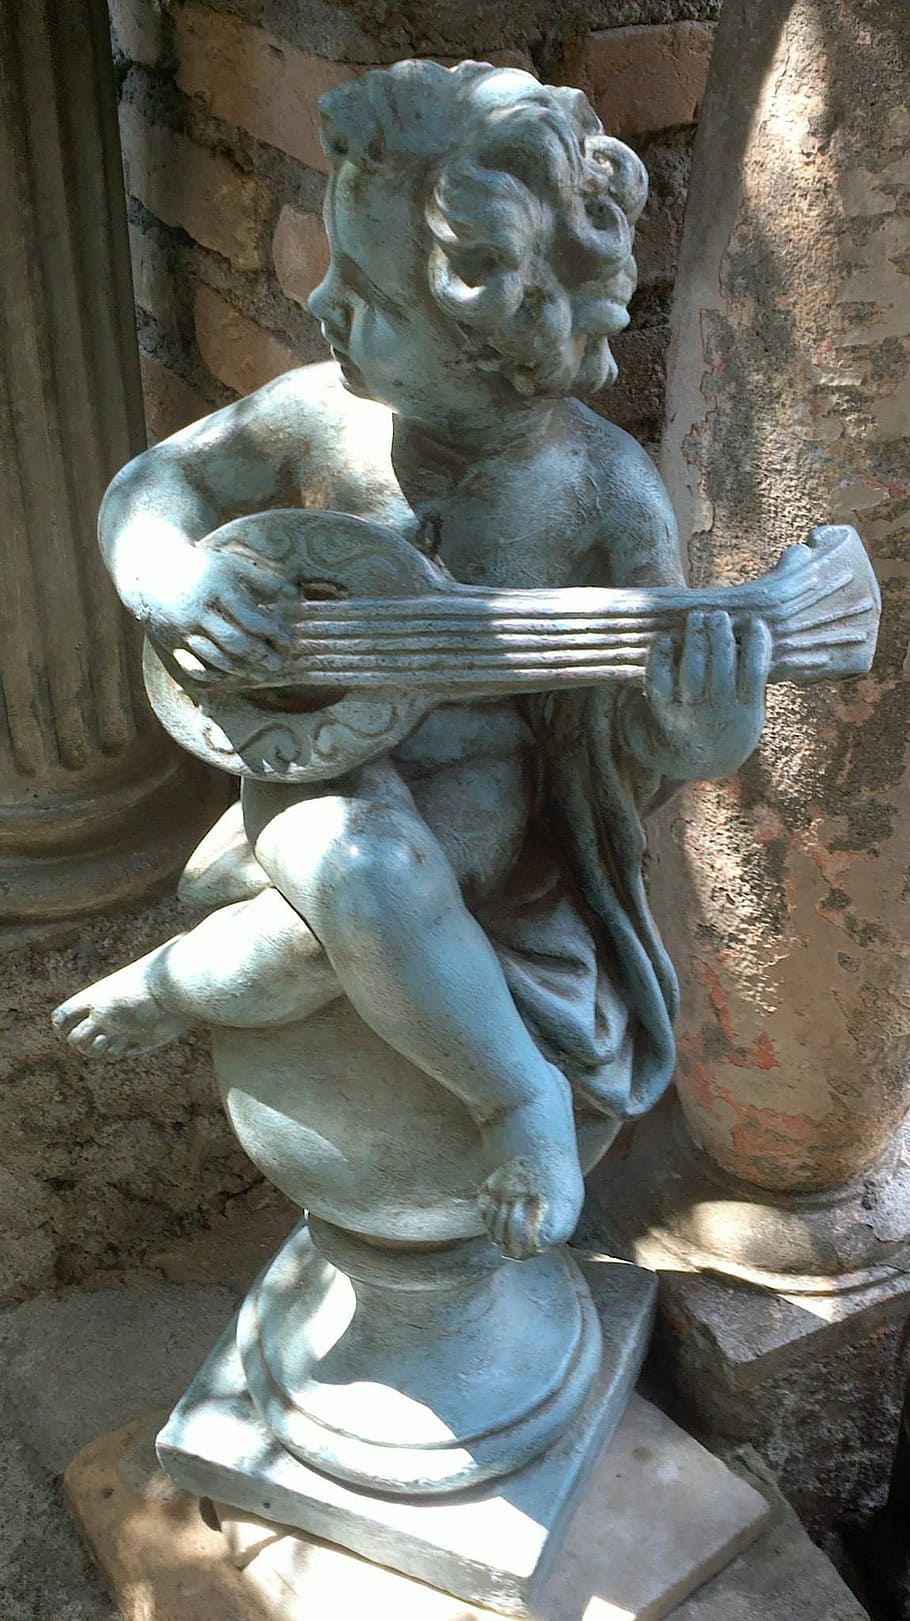 Cherub, Lute, Statue, Cupid, playing, angel, play, sculpture, art and craft, marble